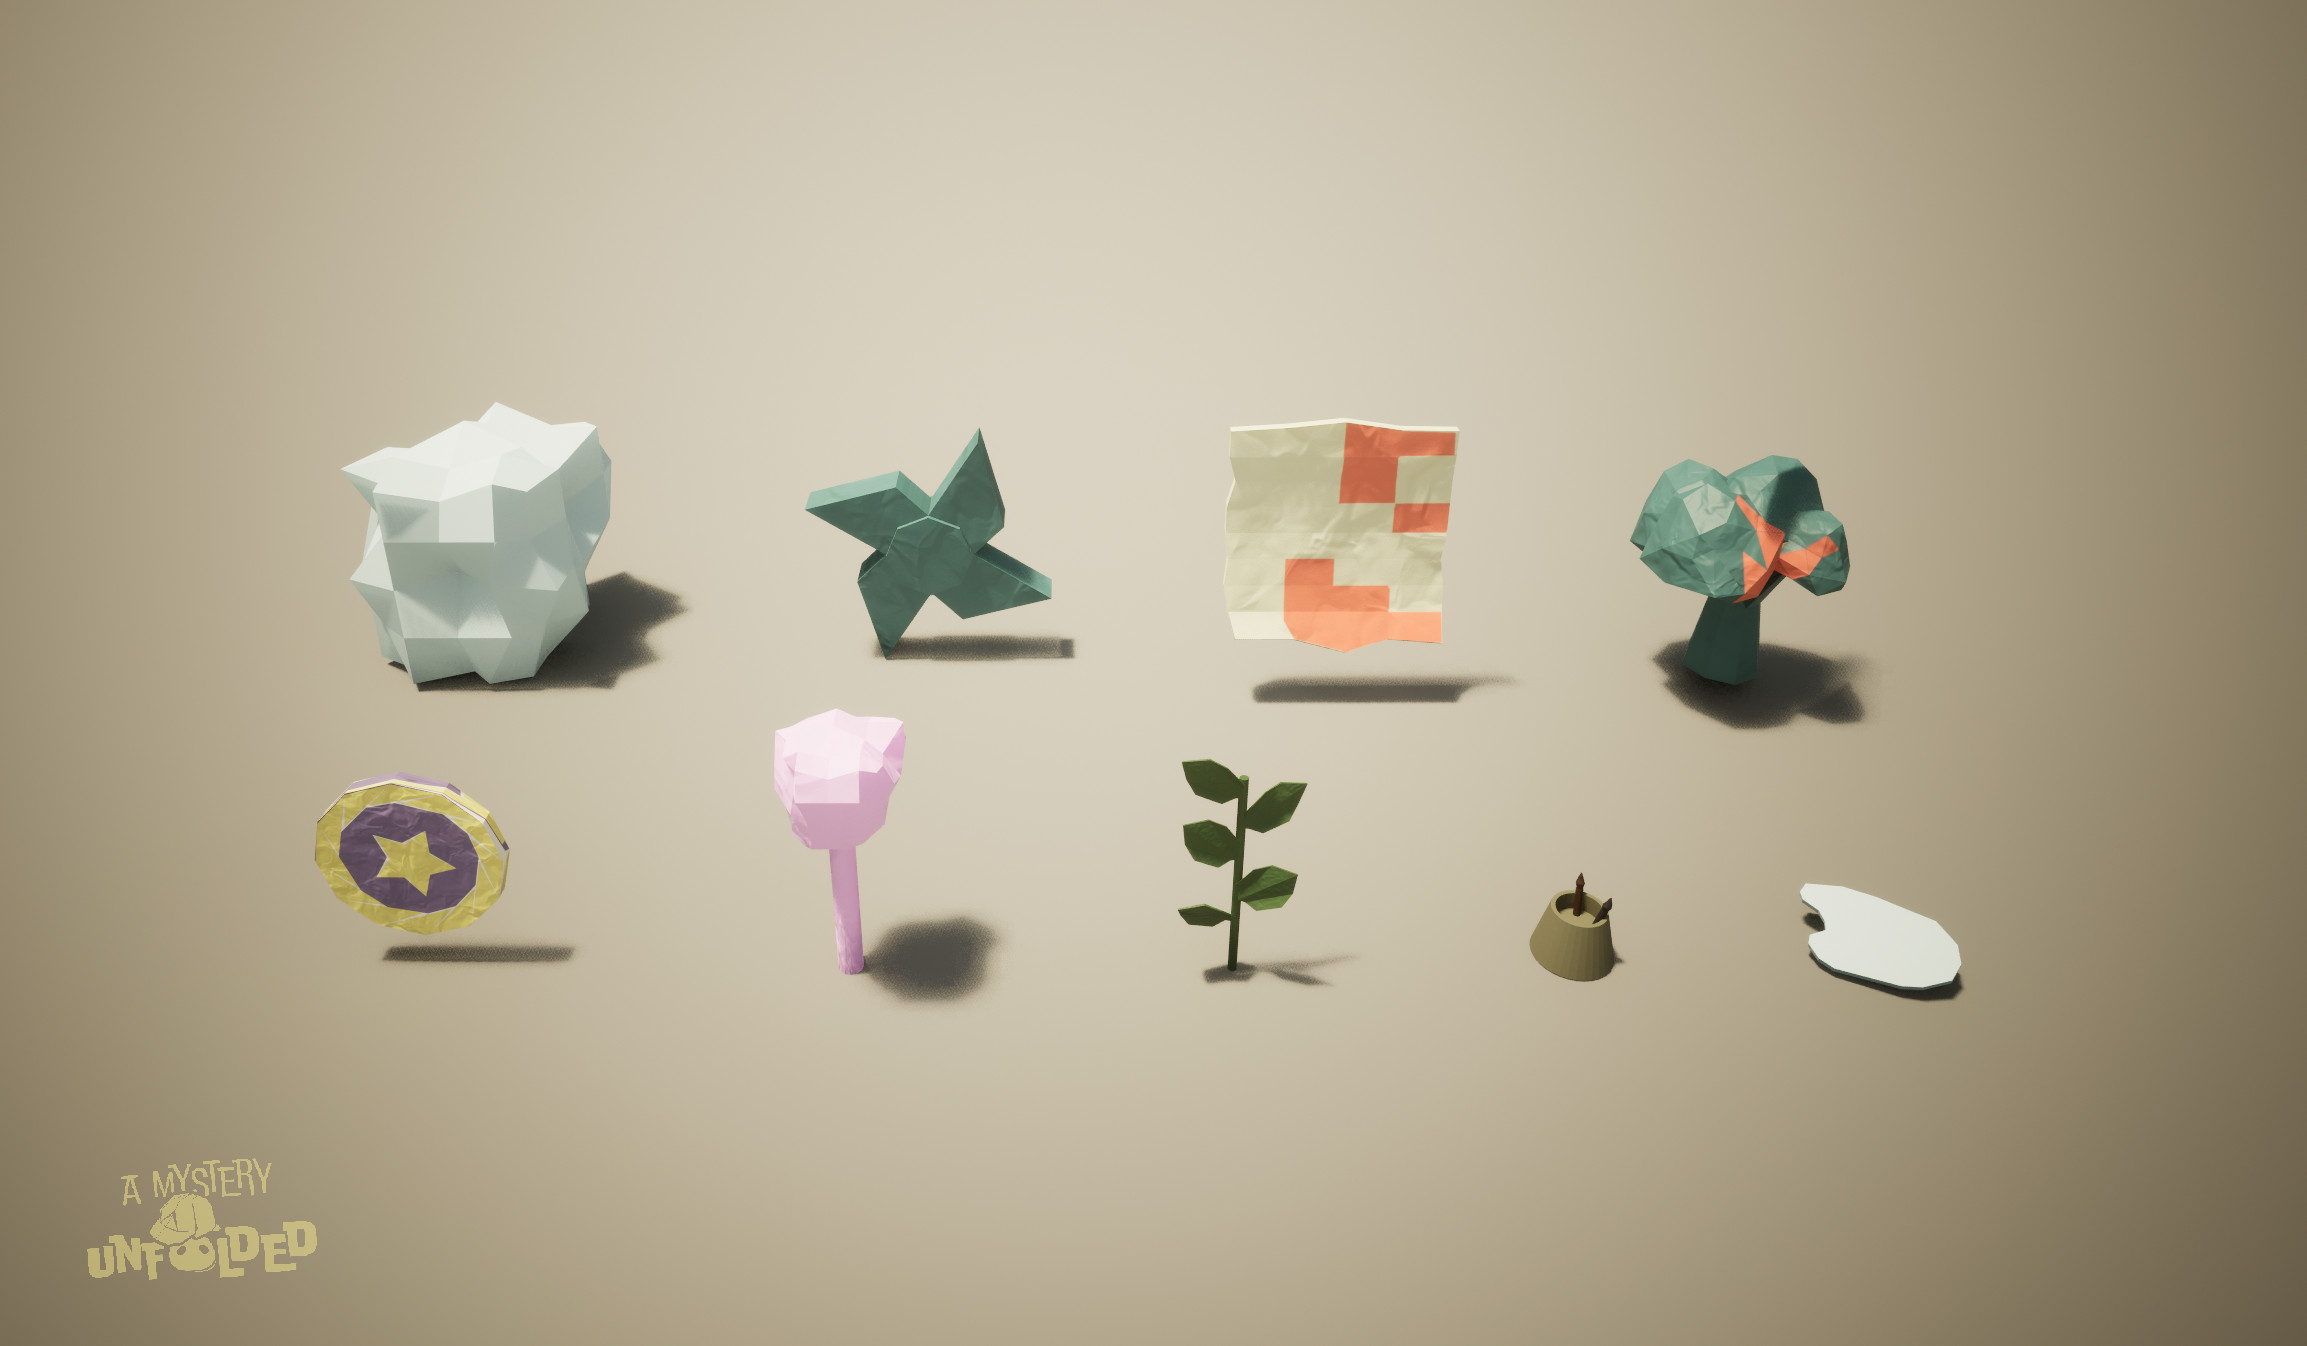 All low poly assets I made for the scene.